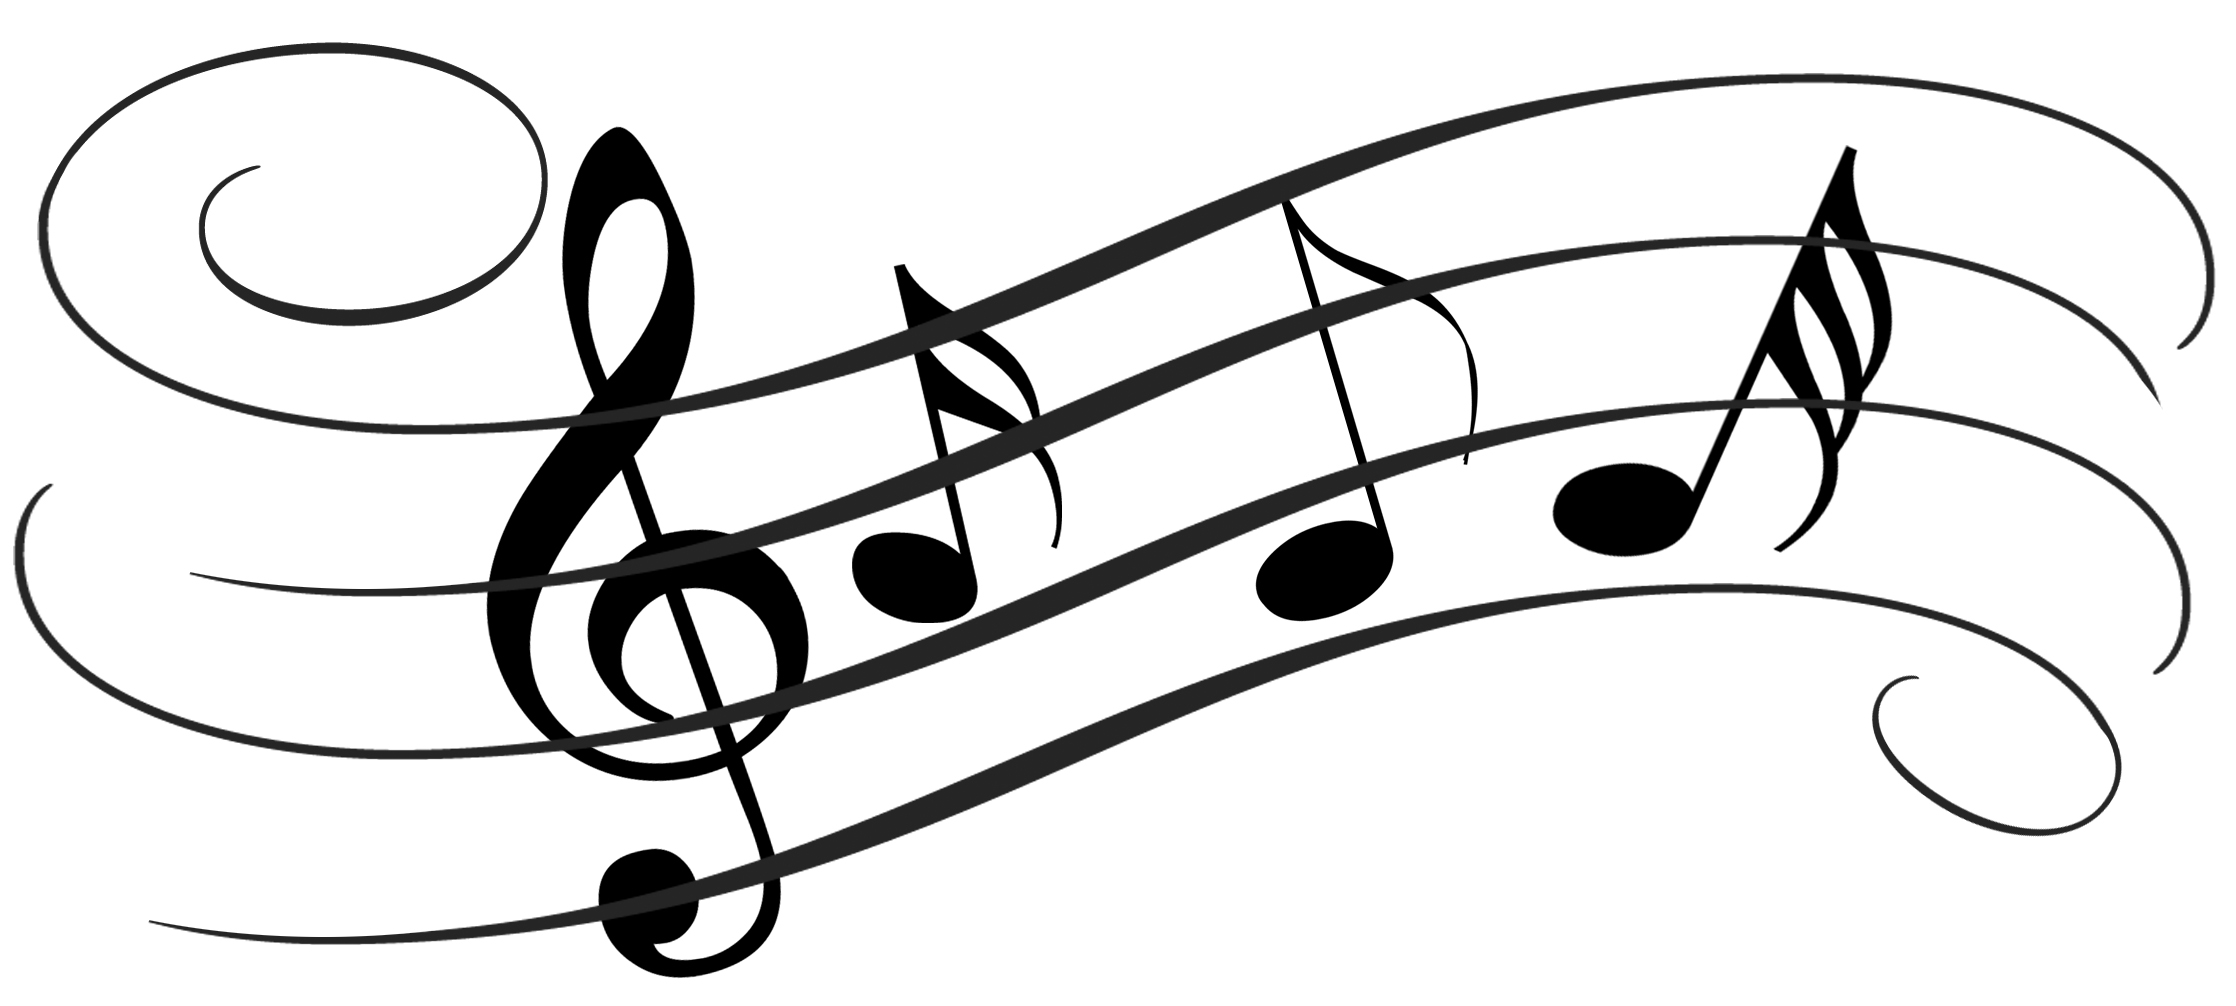 Music Notes Clip Art Png | Clipart library - Free Clipart Images